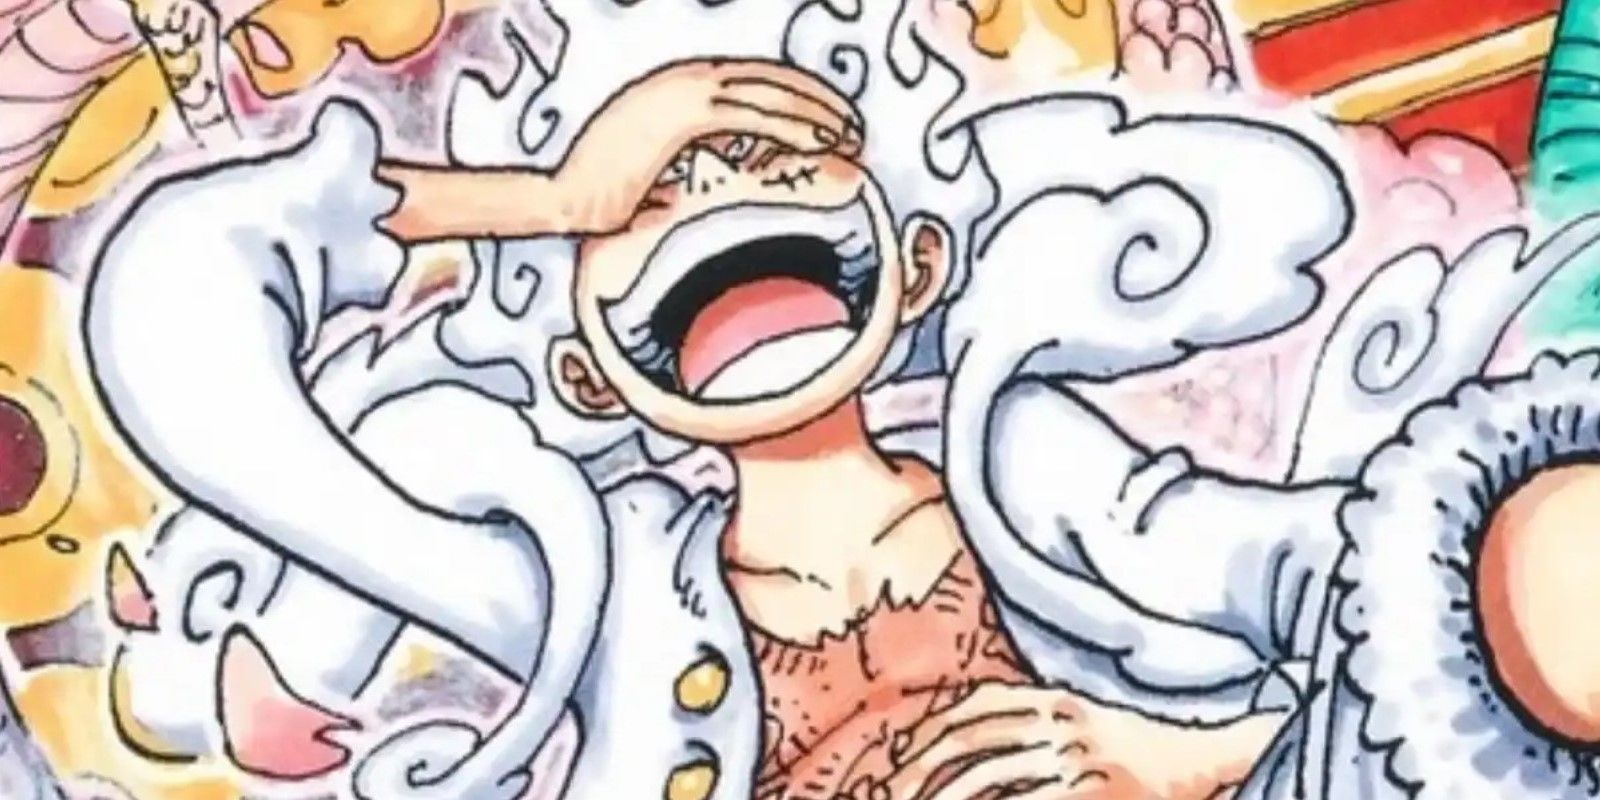 One Piece: Luffy's Funny Description of Gear Five